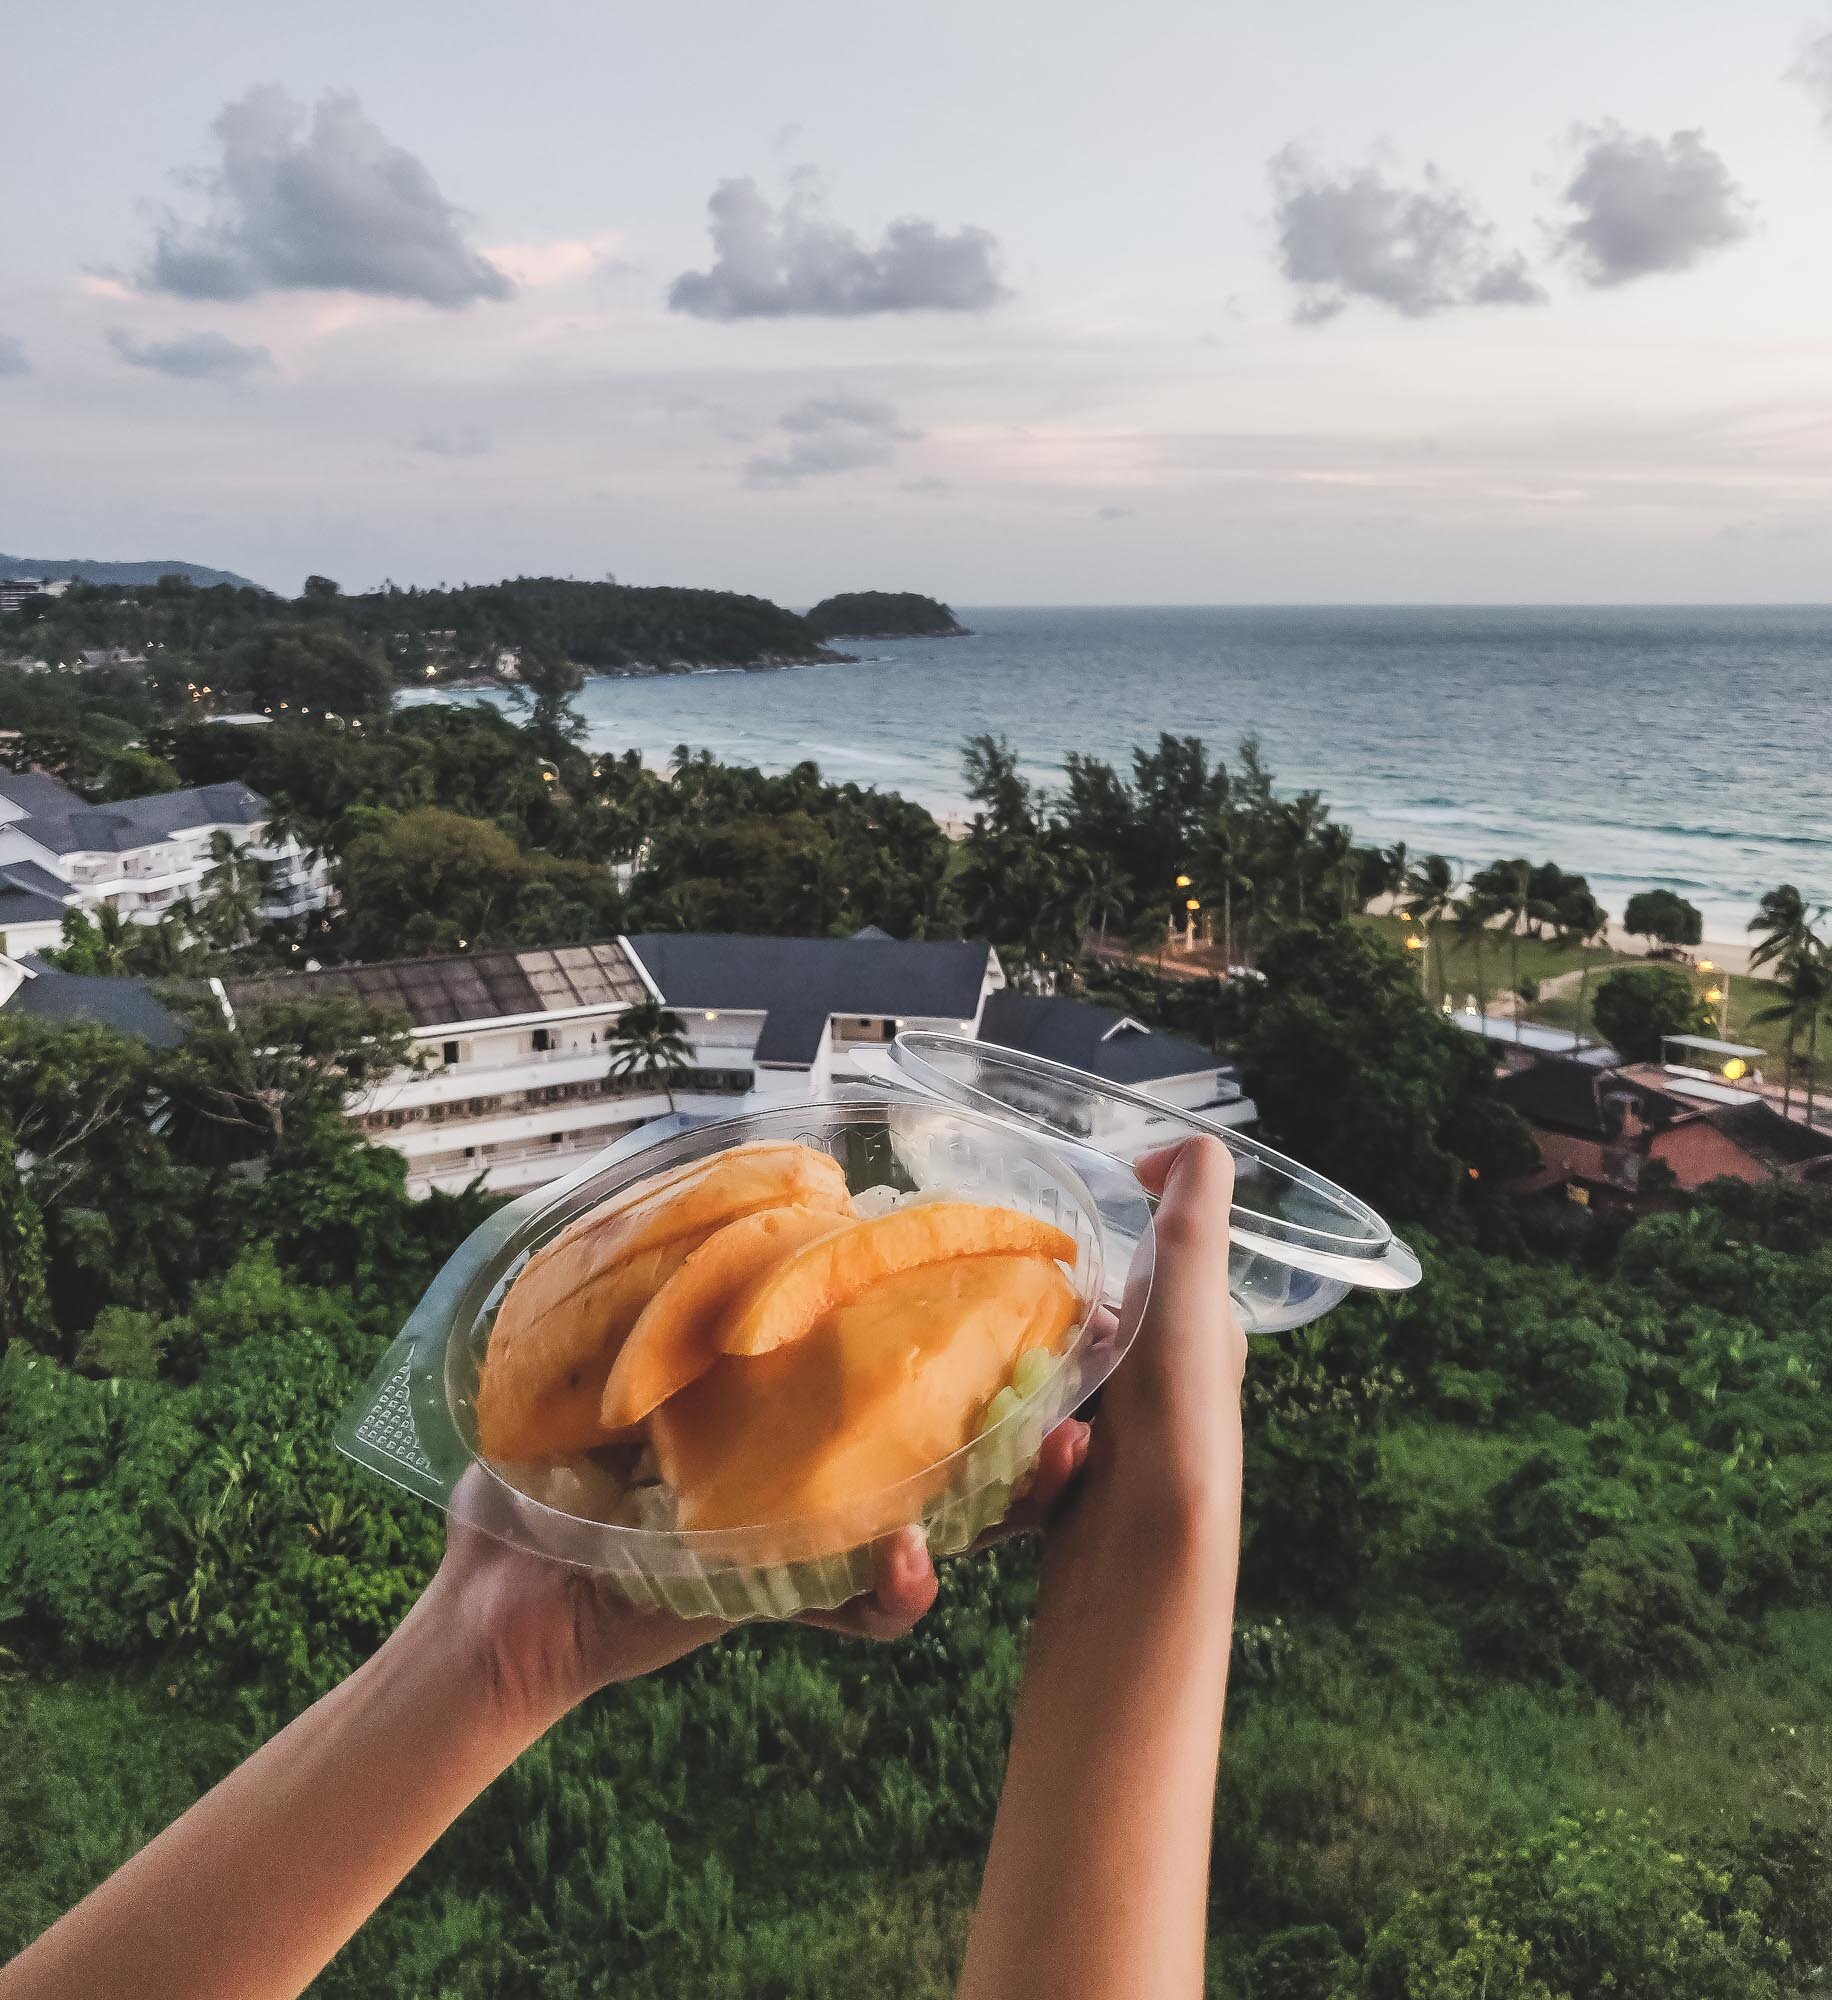 Our daily routine; watching the sunset while eating mango sticky rice